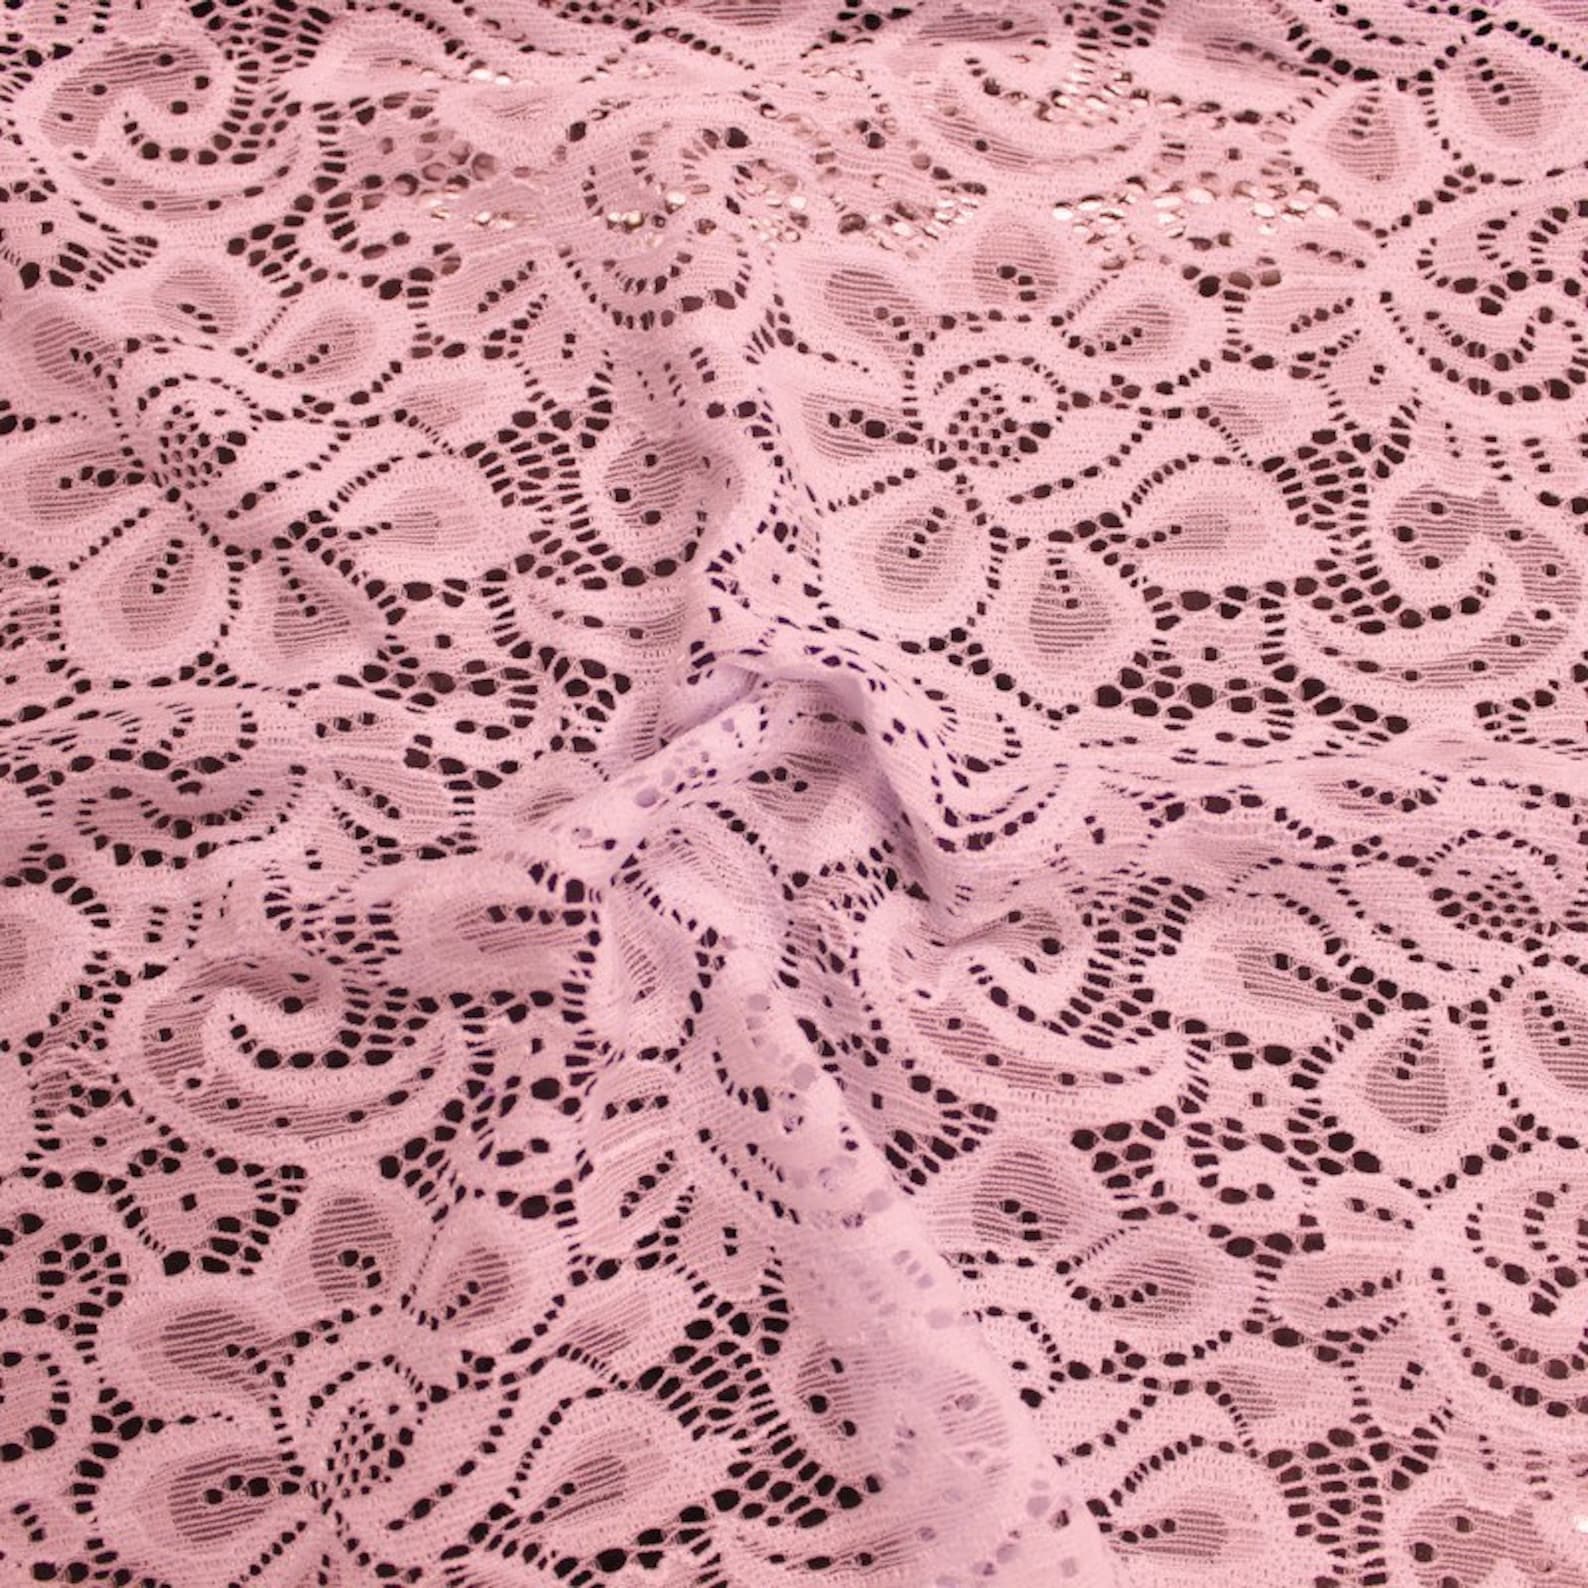 Light Pink 60 Light-Weight Floral Lace Fabric by the | Etsy